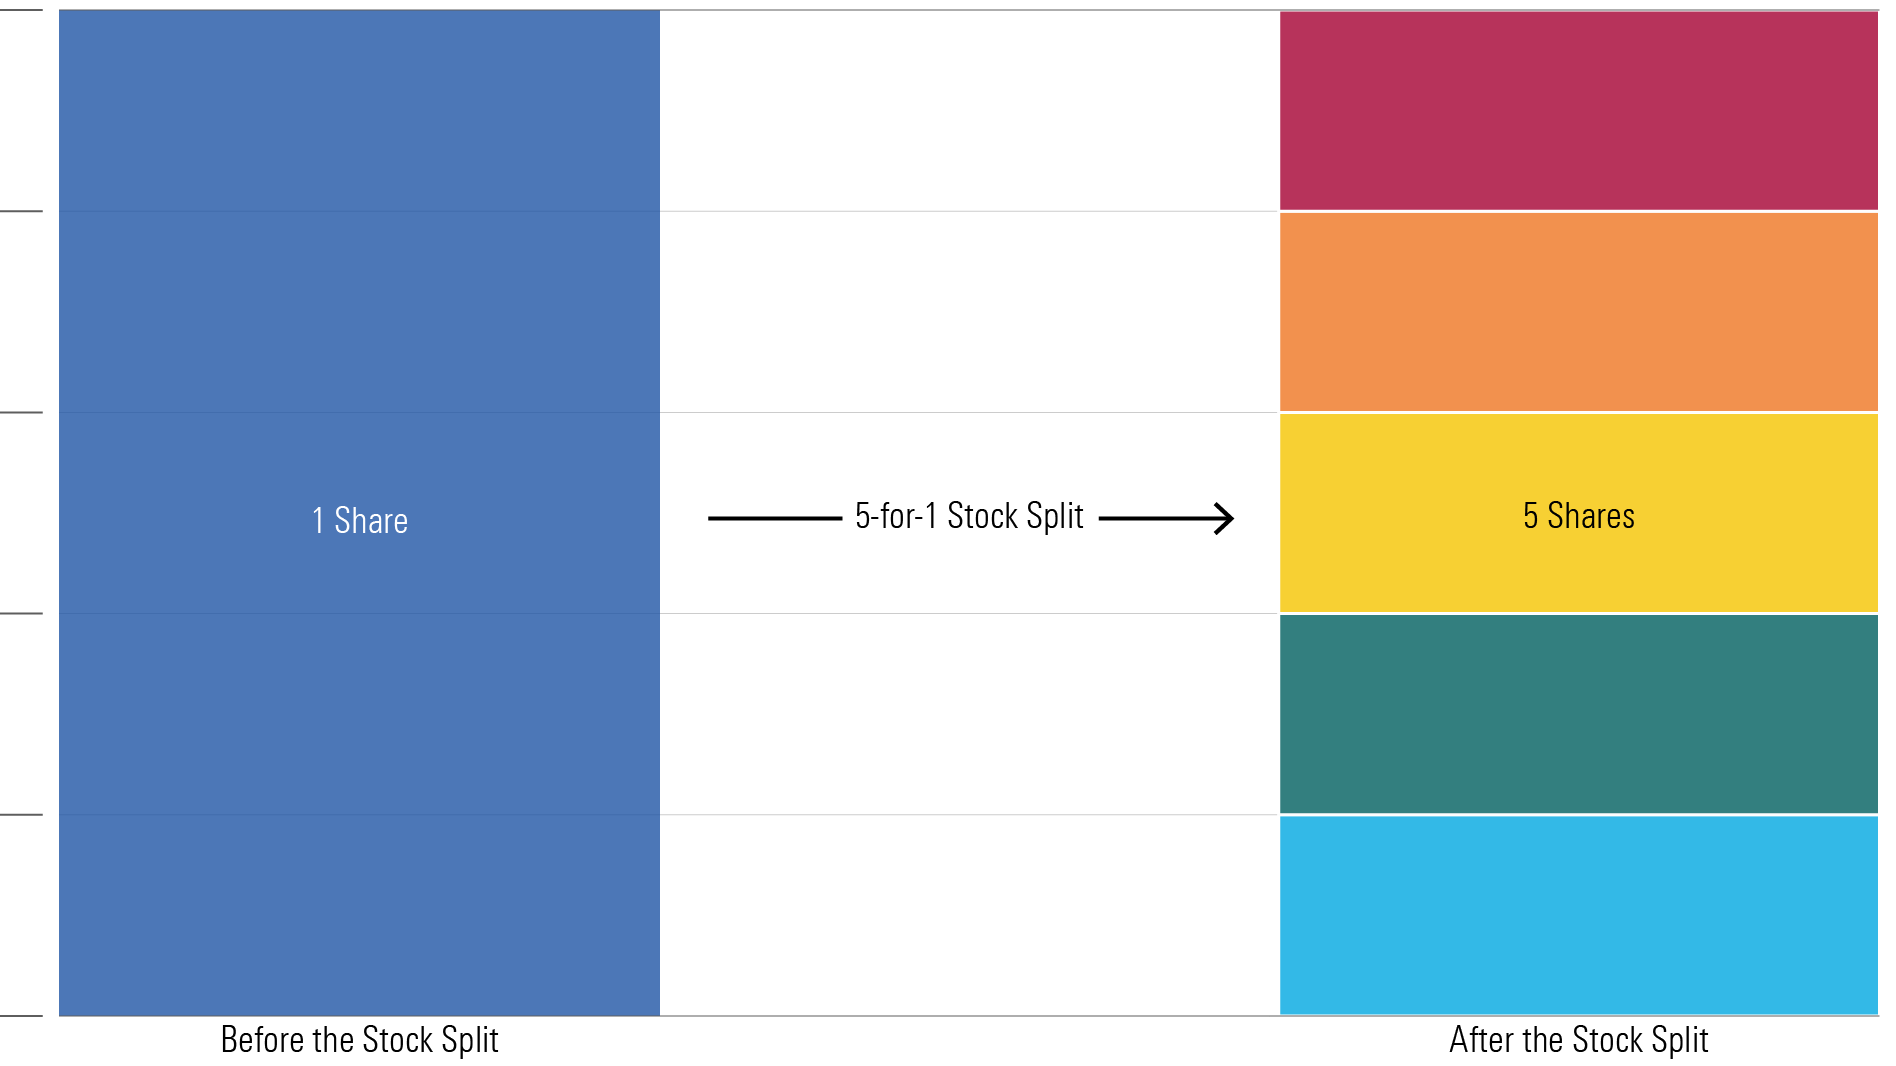 Bar chart showing the before and after of a 5-for-1 stock split.